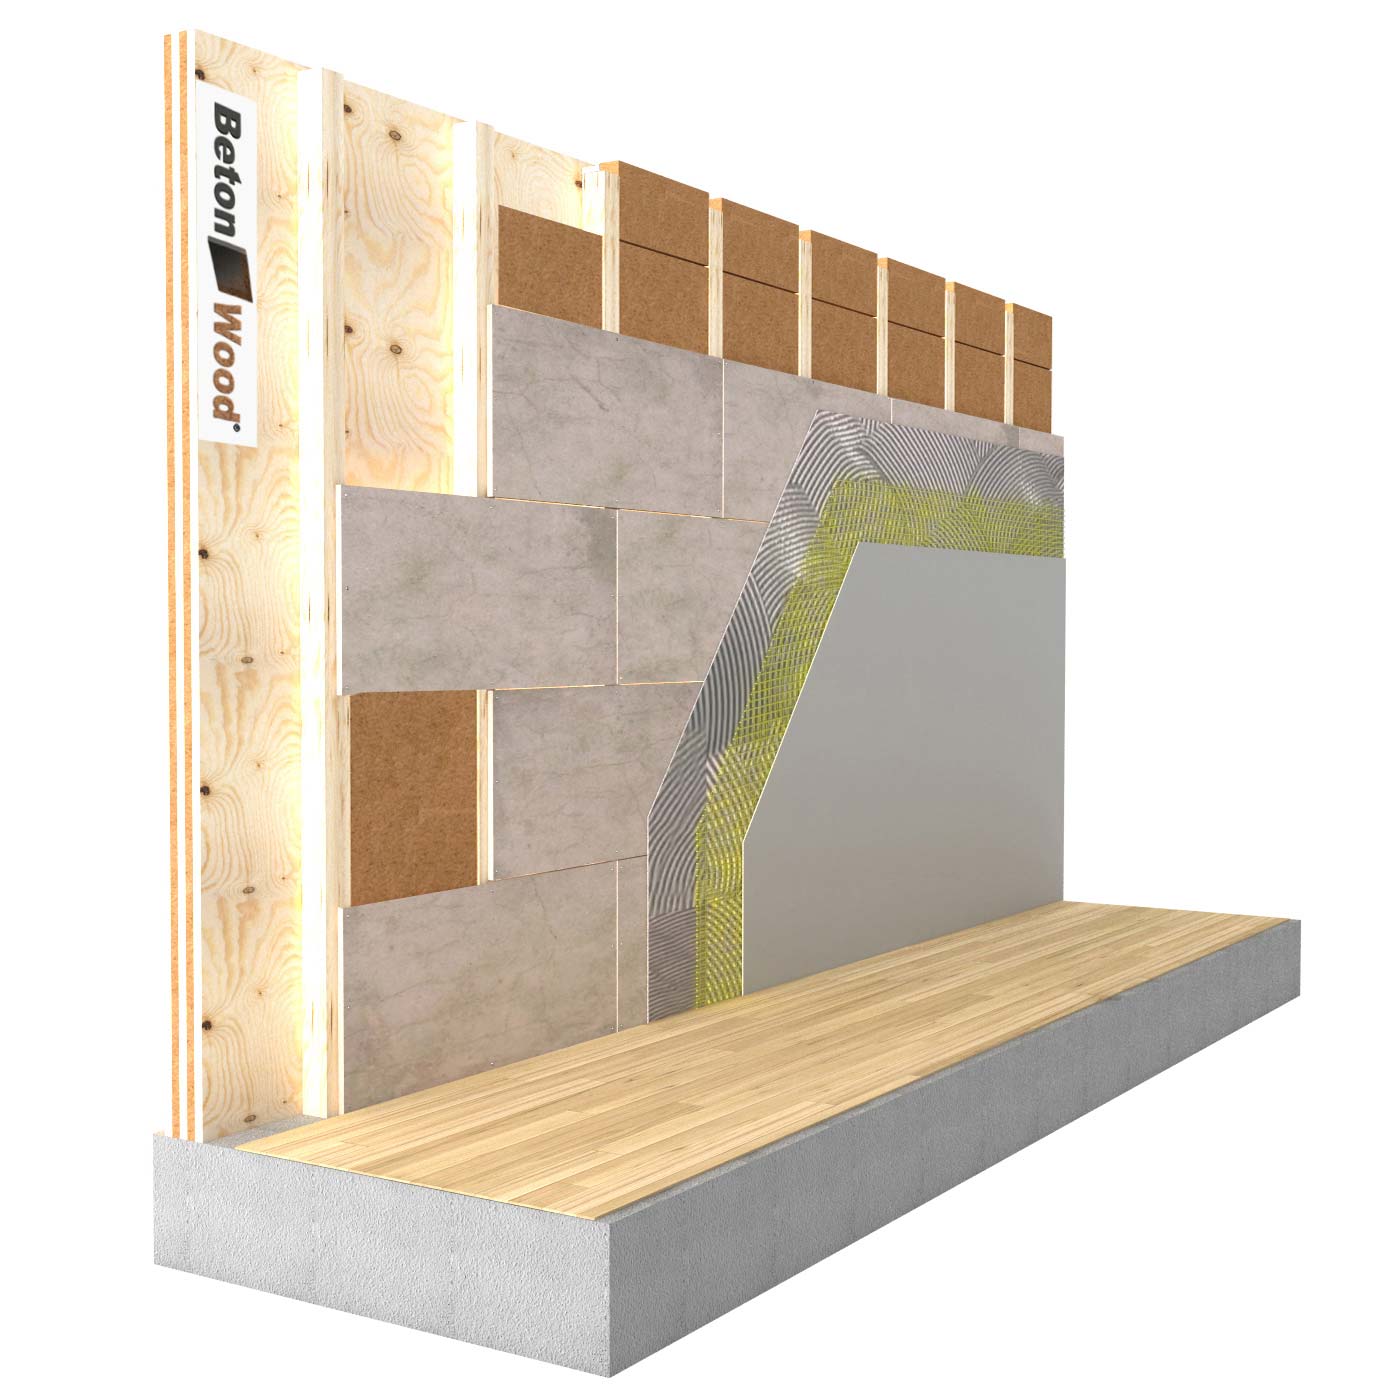 Internal insulation system with Therm fiber wood on wooden walls